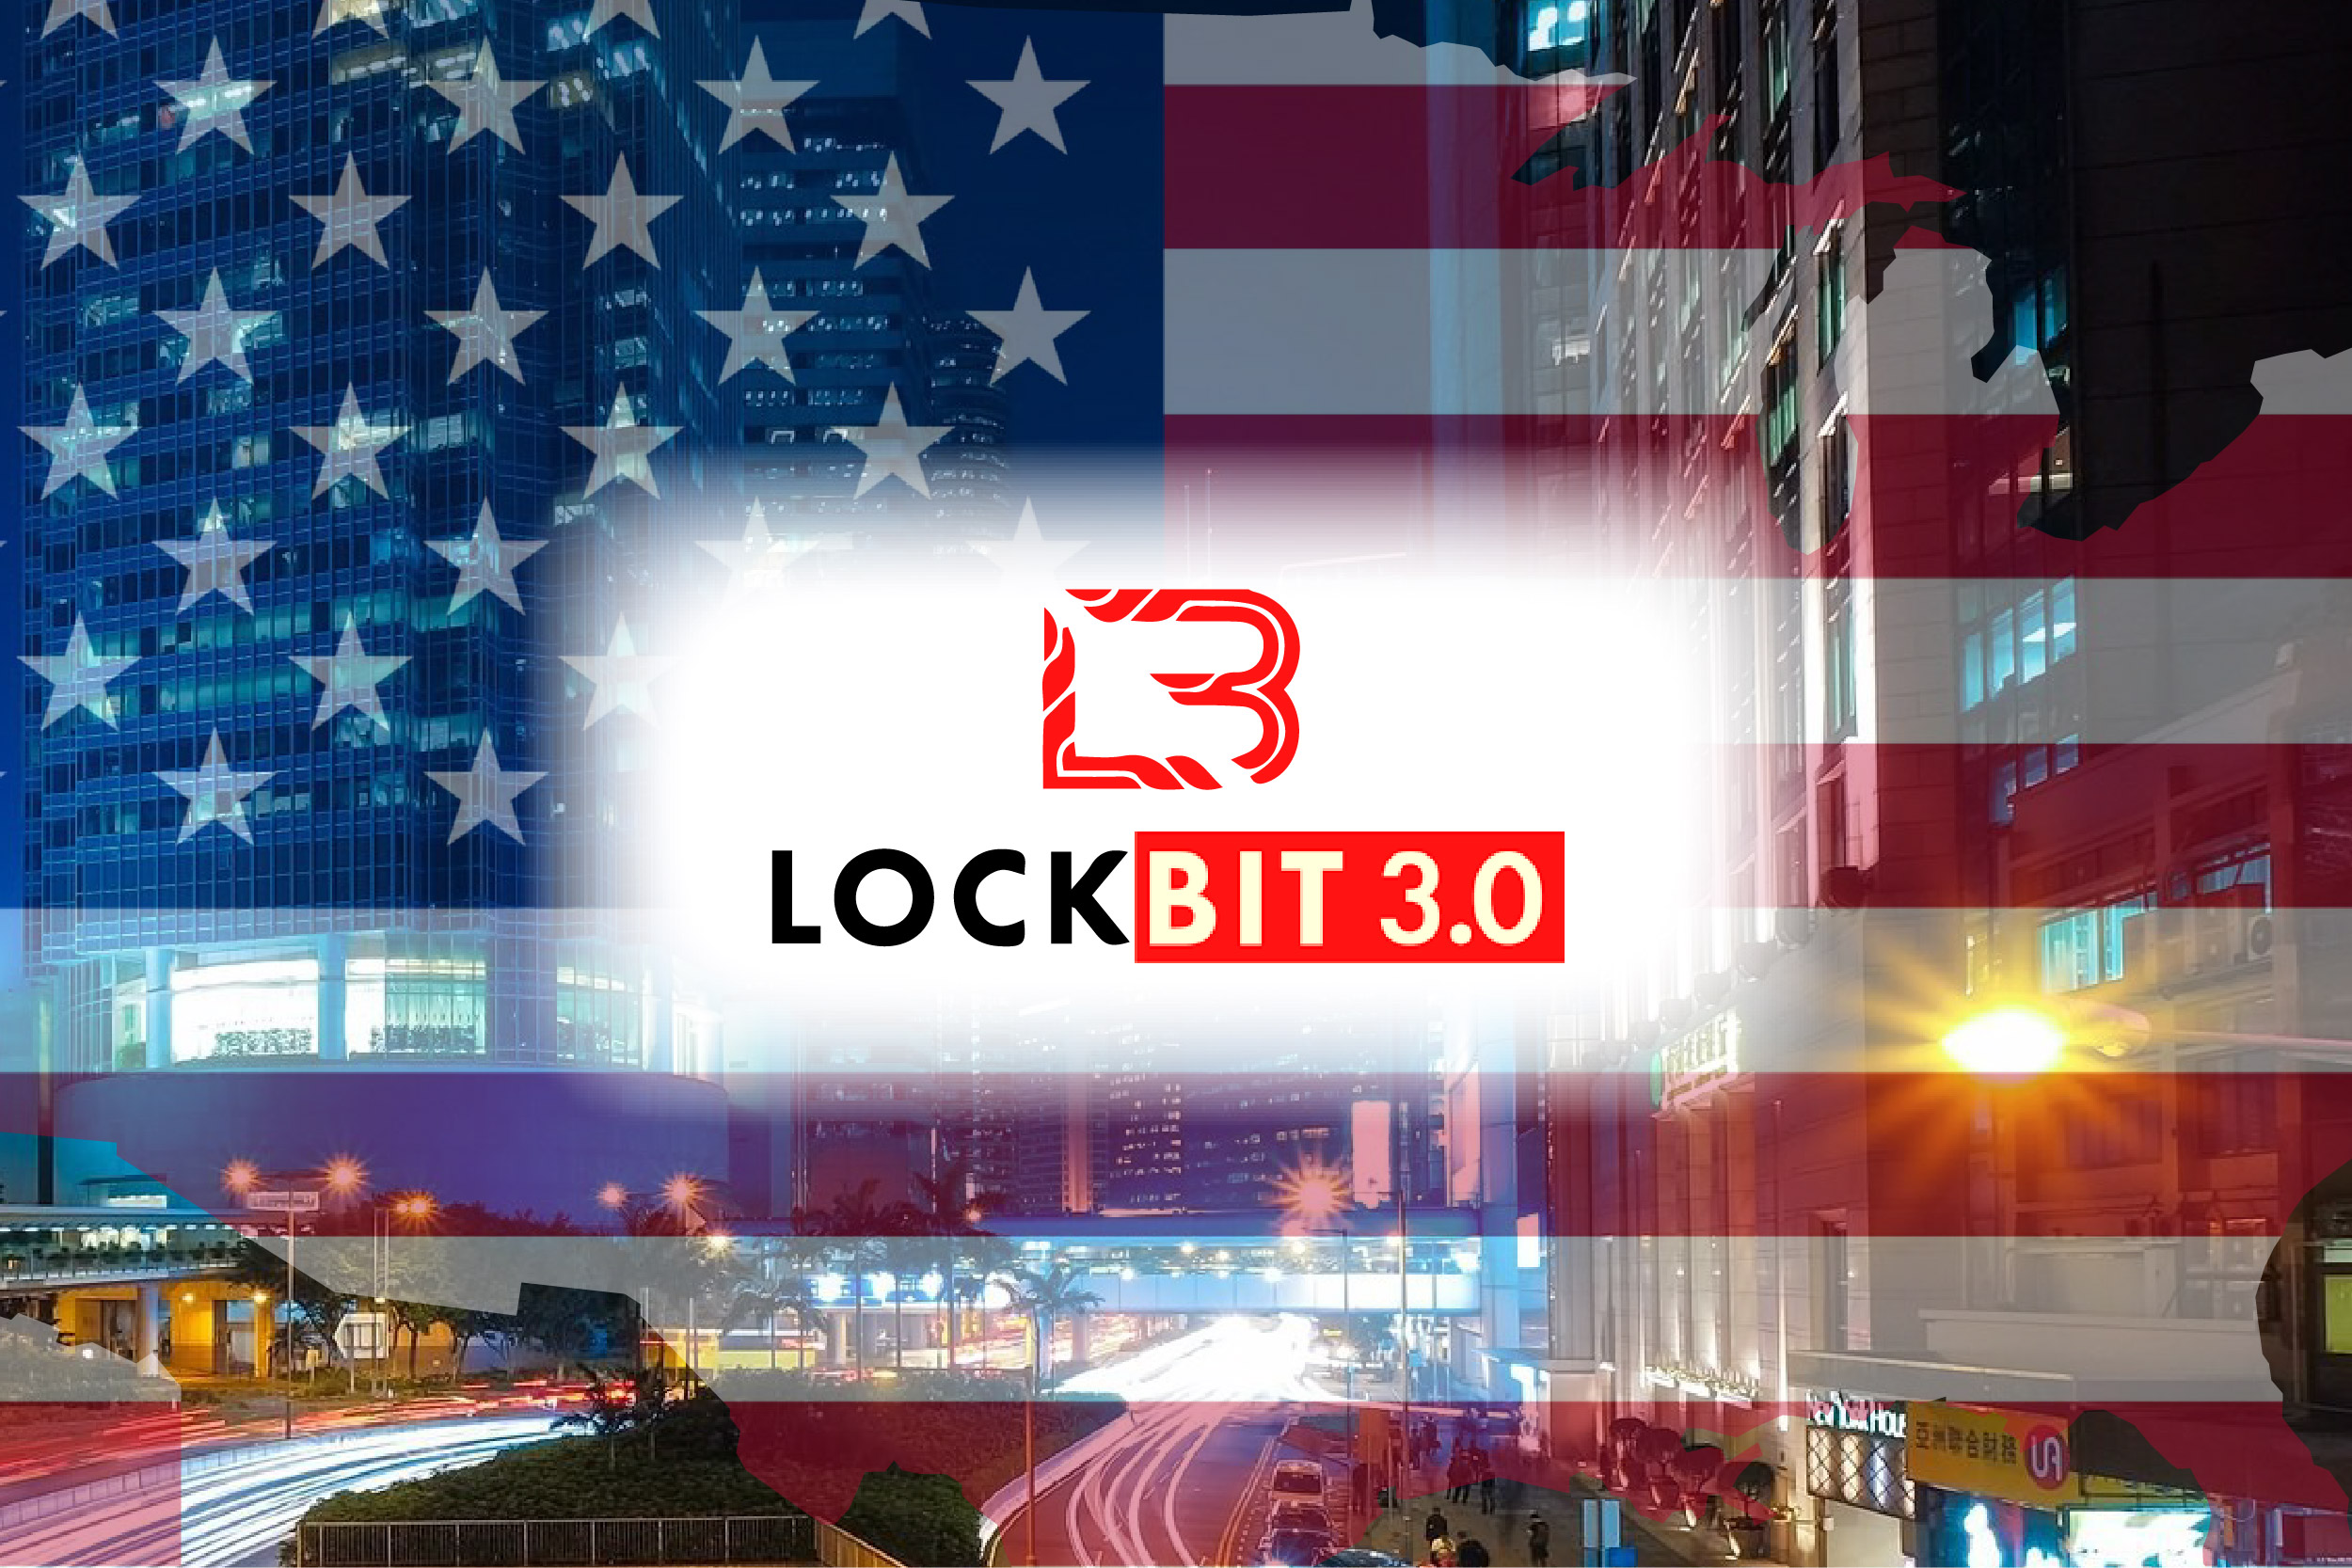 FBI, CISA and MS-ISAC Releases Advisory to Warns About LockBit 3.0 Ransomware Attacks